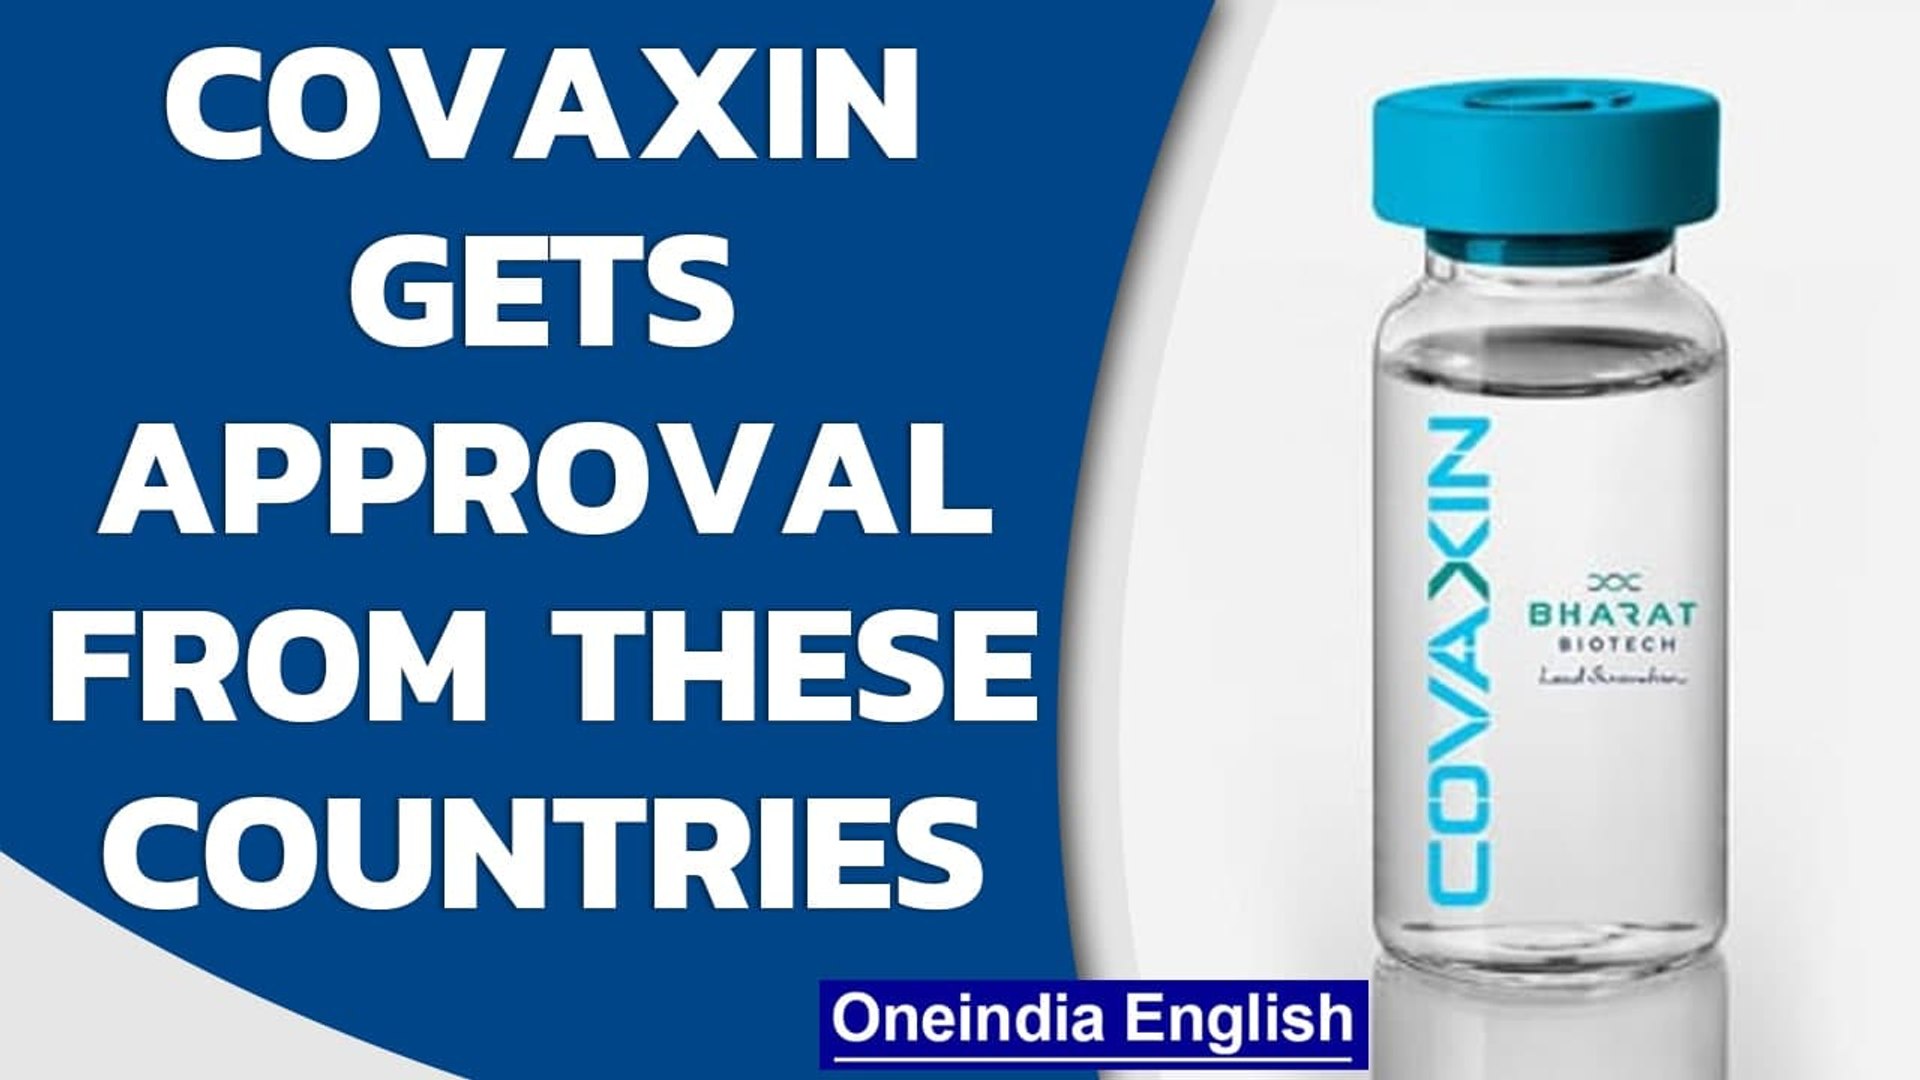 Covid-19 vaccine: Hong Kong & Vietnam latest to approve Covaxin for emergency use | Oneindia New